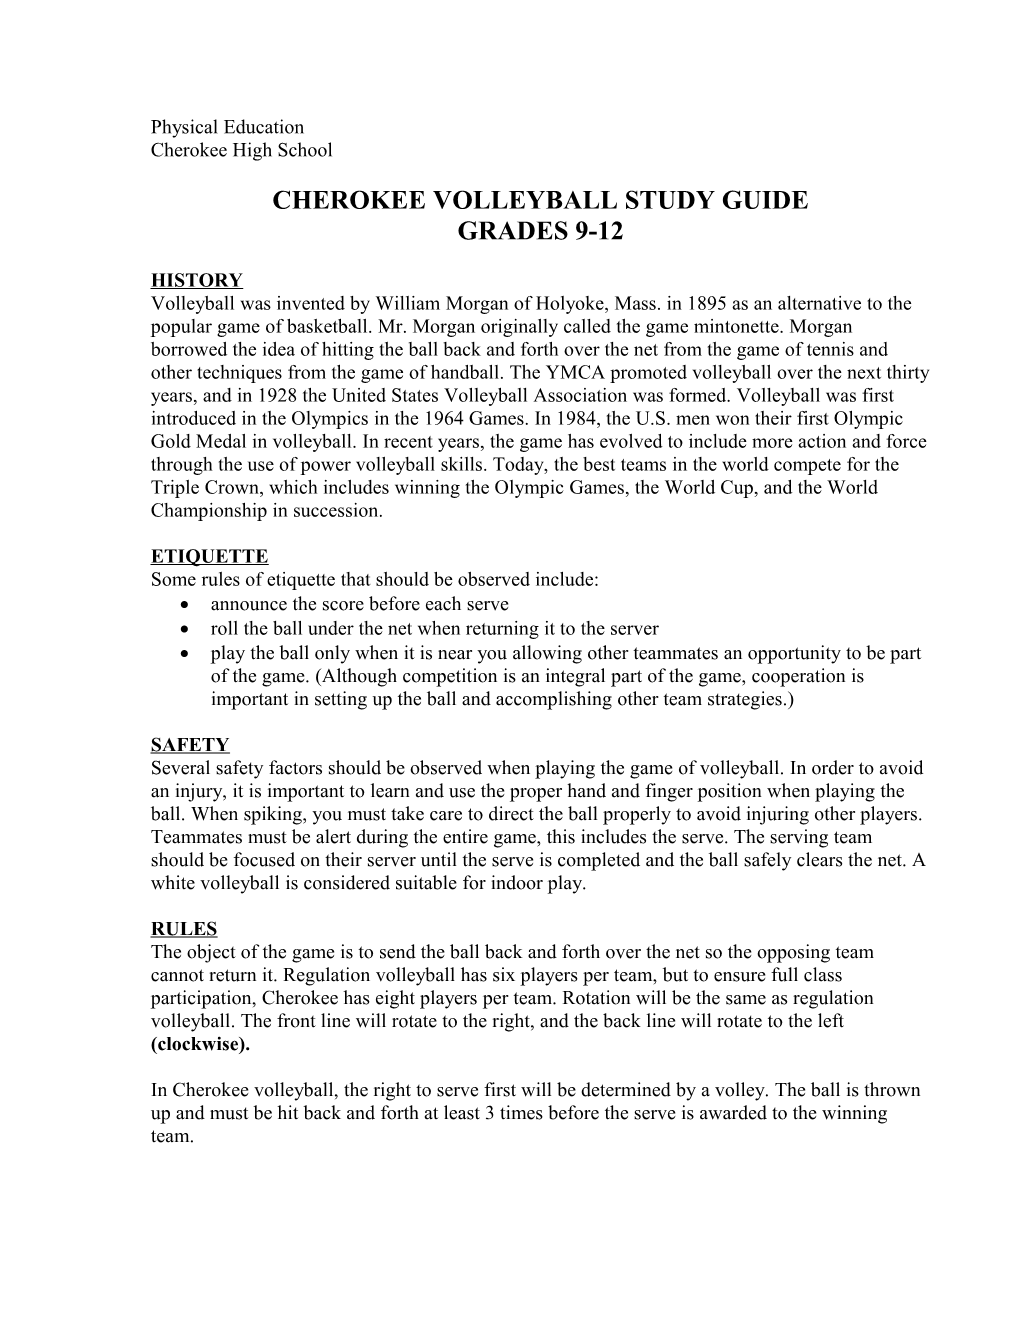 Cherokee Volleyball Study Guide